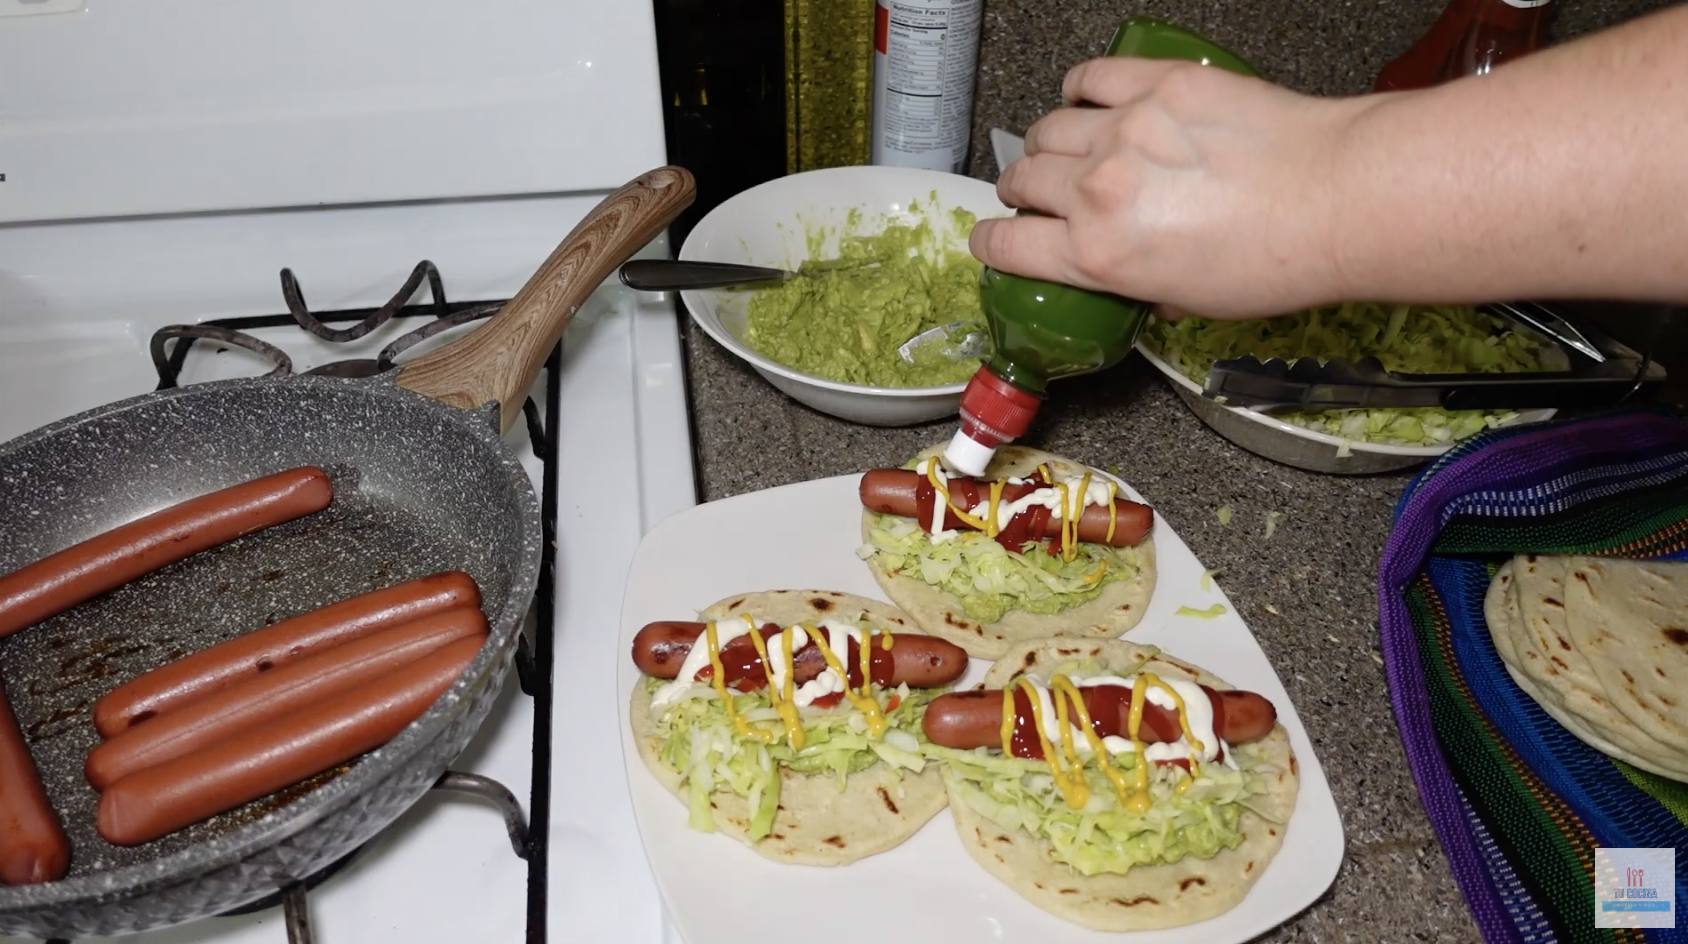 A person adds the condiments to mixtas on a plate as other hot dogs are cooking in a pan